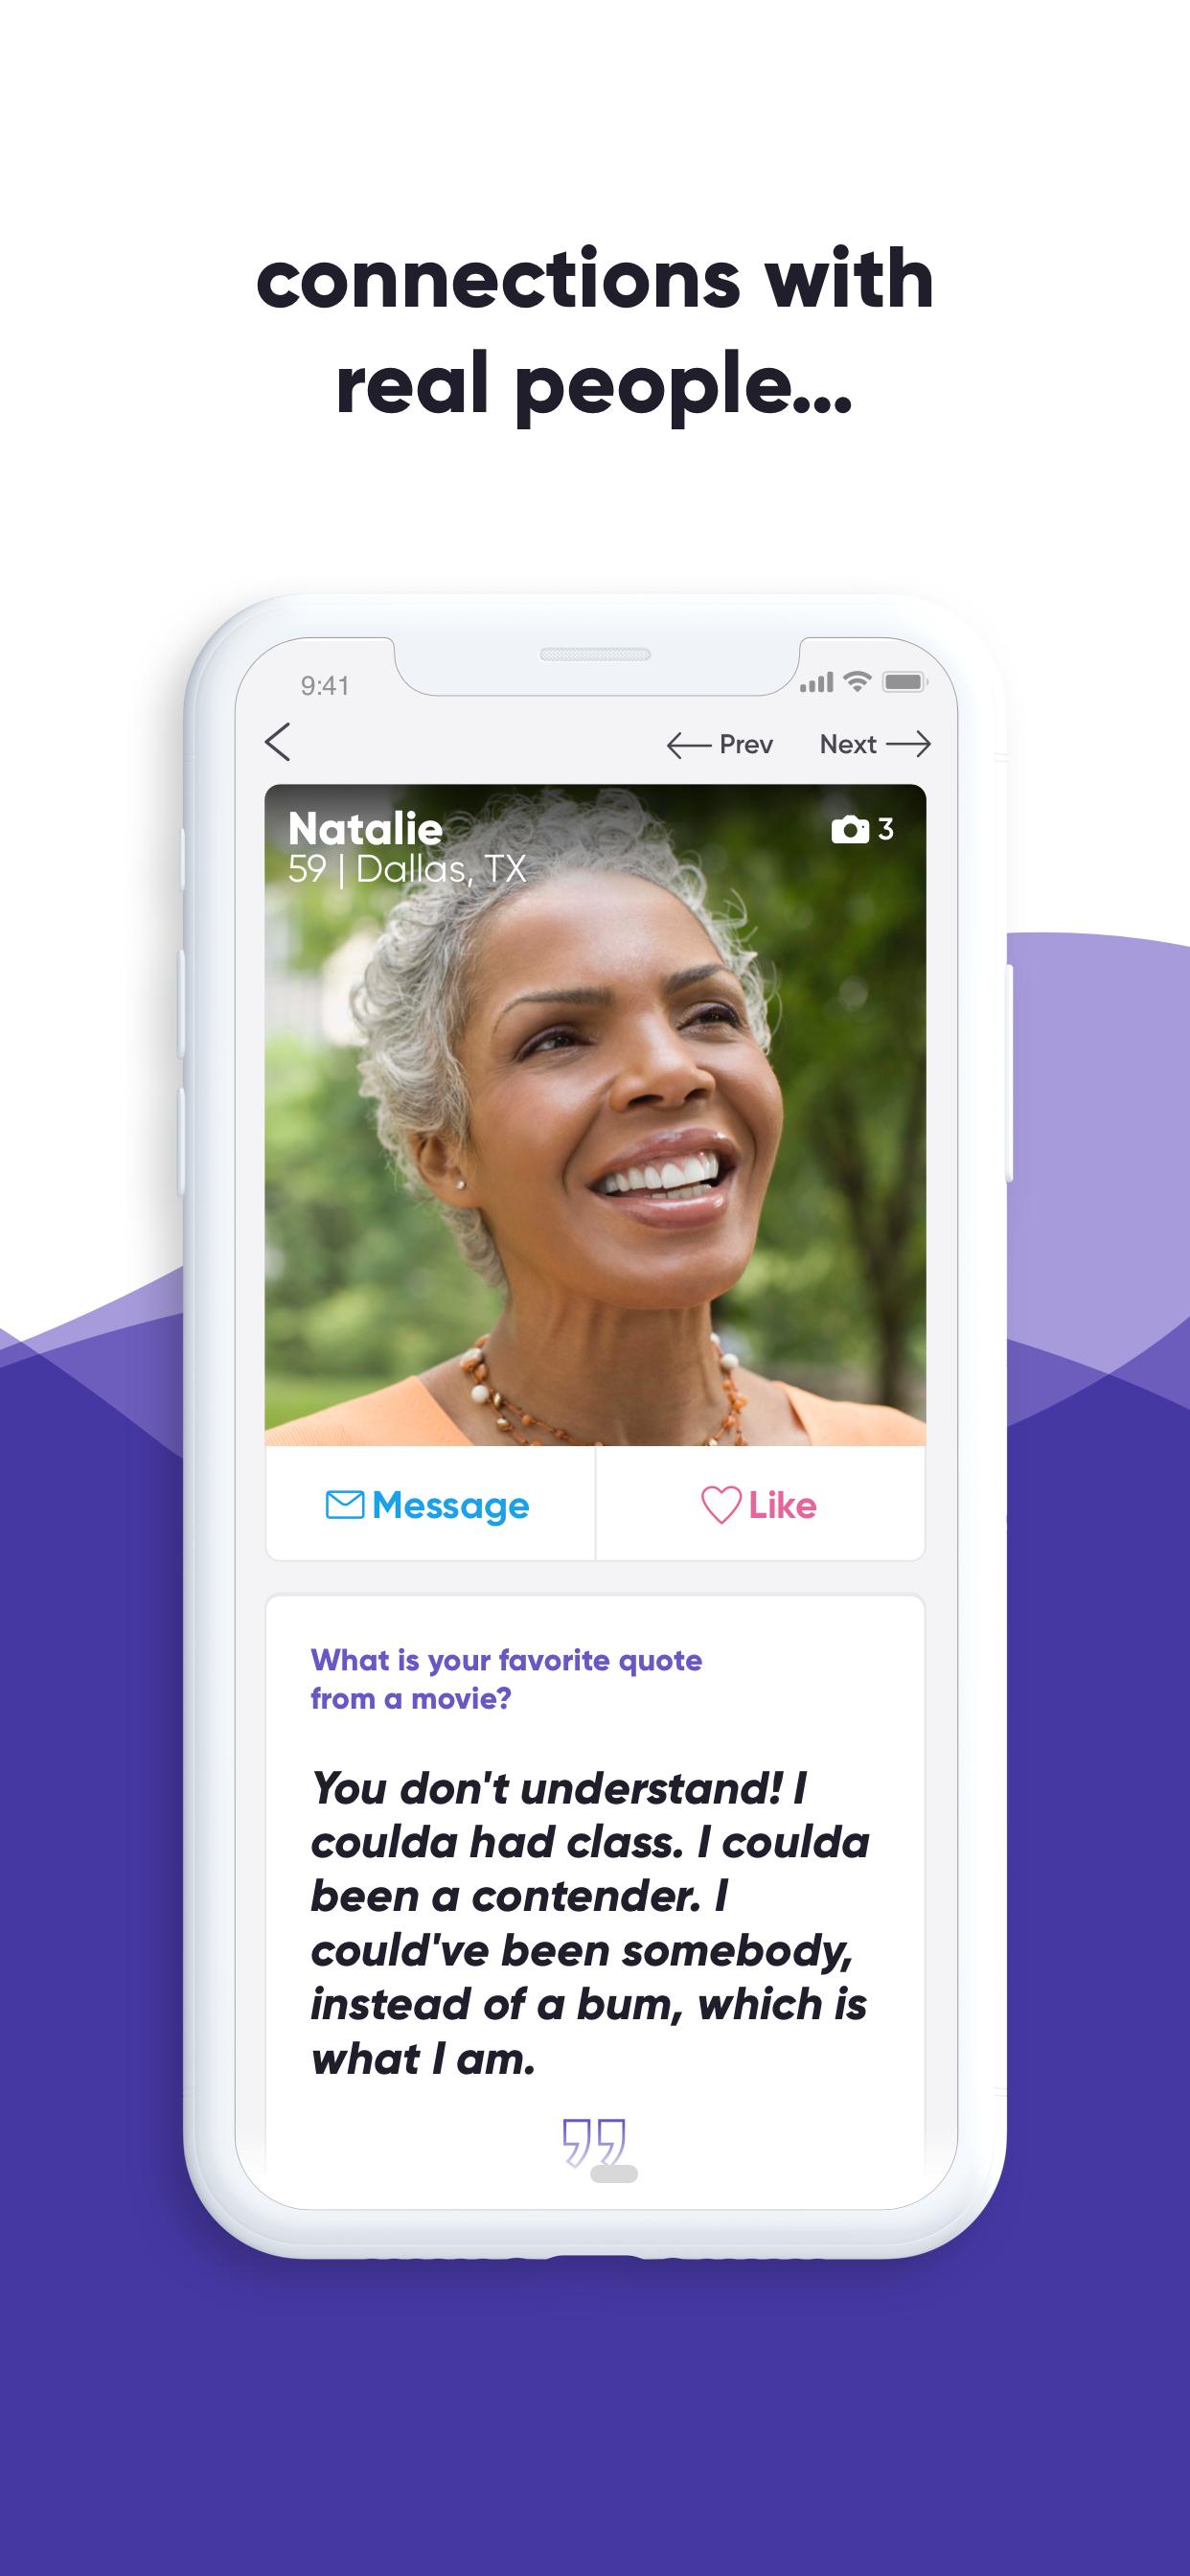 OurTime Dating for Singles 50 2.6.0 Screenshot 5